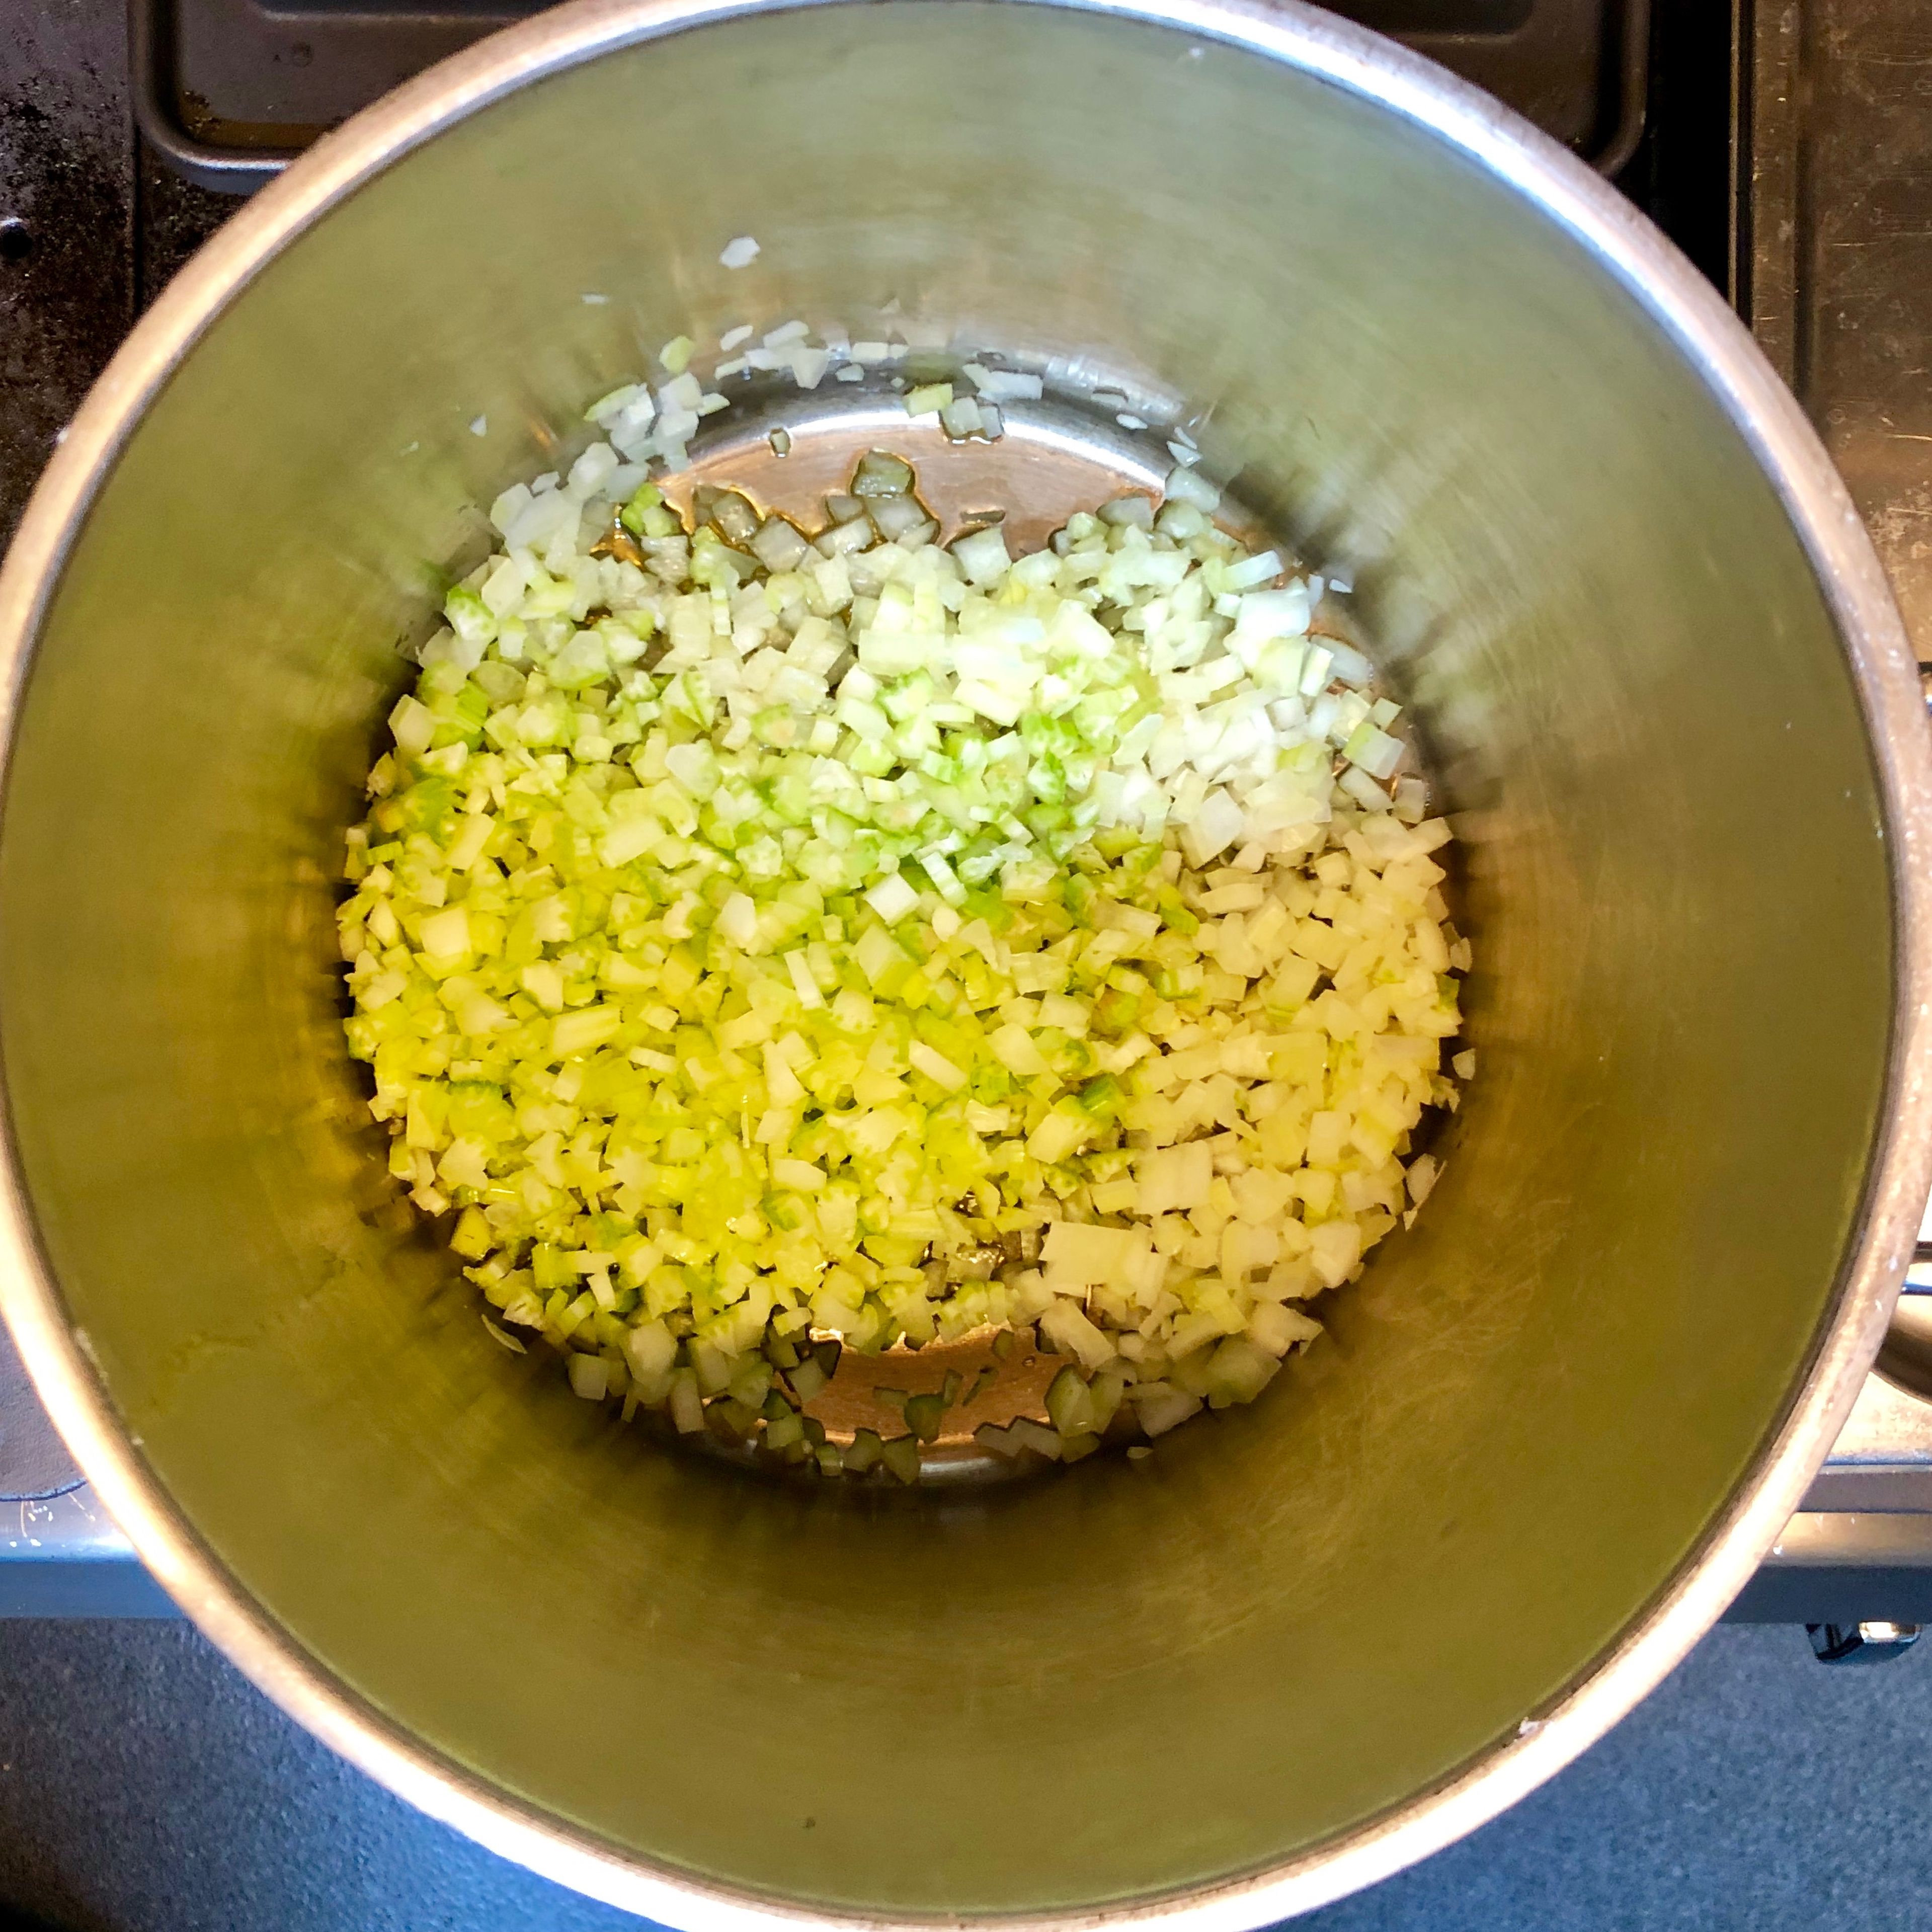 Cut the onion and celery into small cubes and chop the garlic. Combine in a medium size stockpot and cook in a medium heat until soft but not brown.